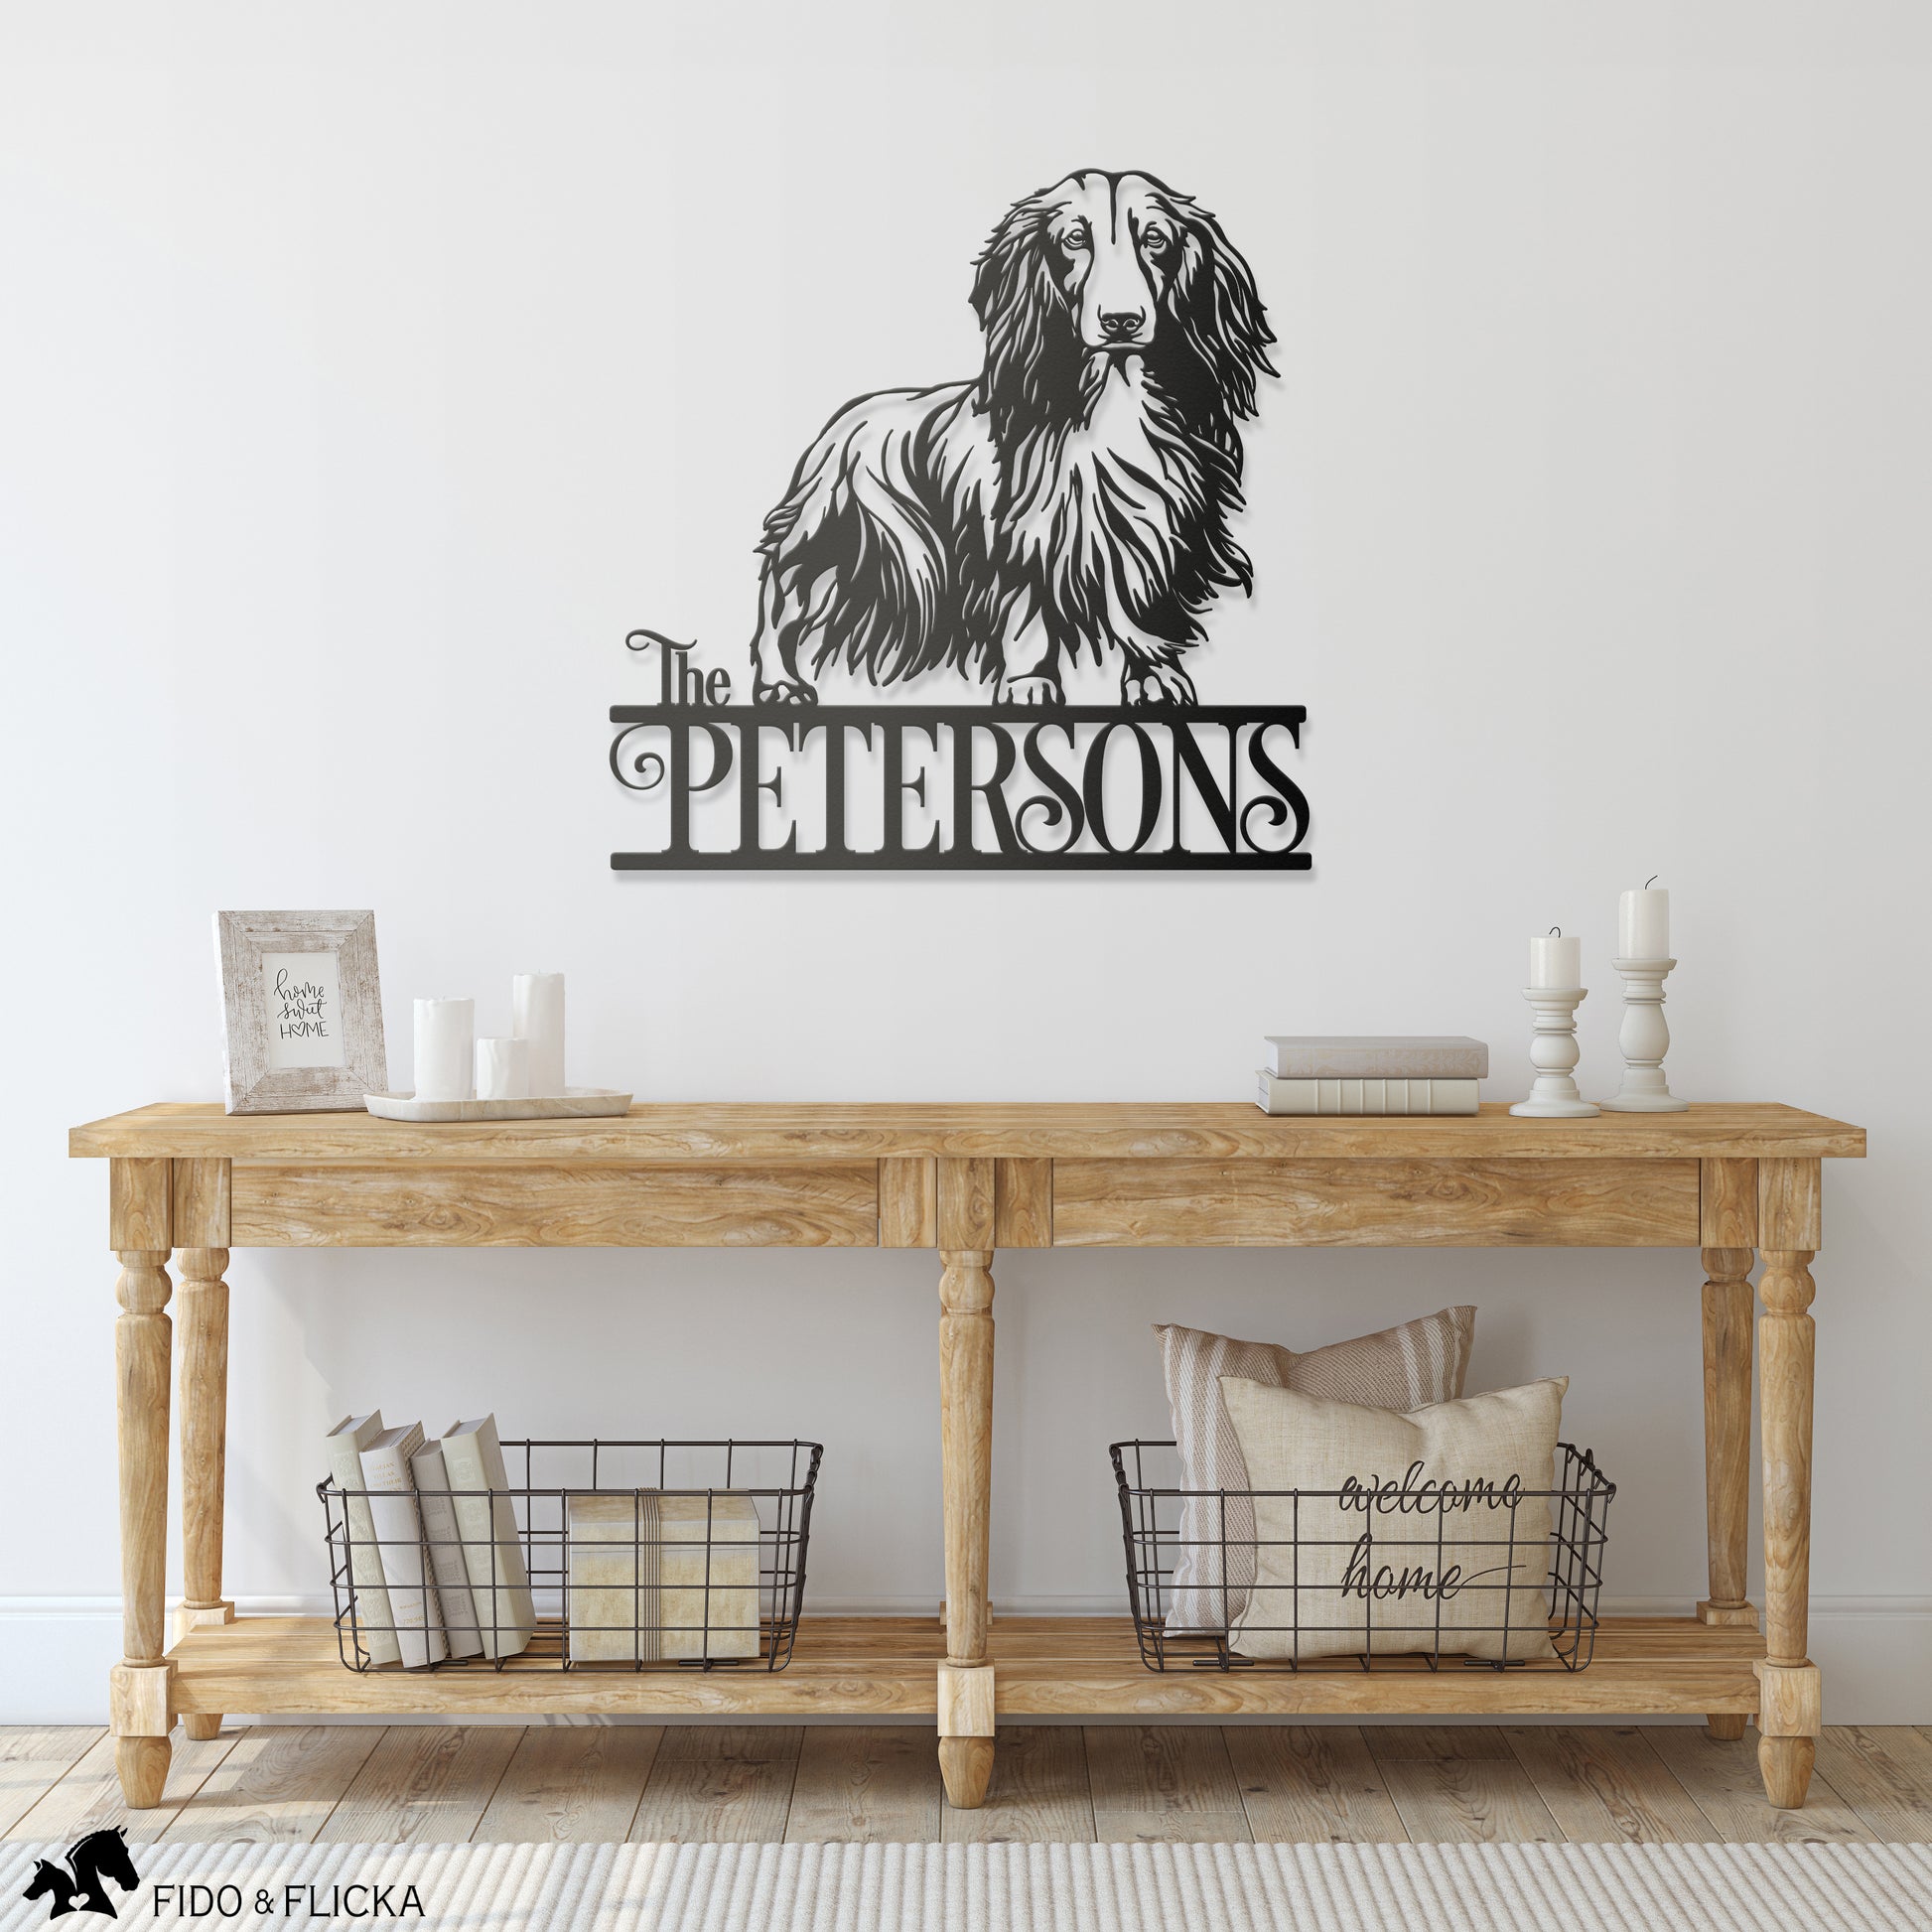 Long-Haired Dachshund family name sign in entry way